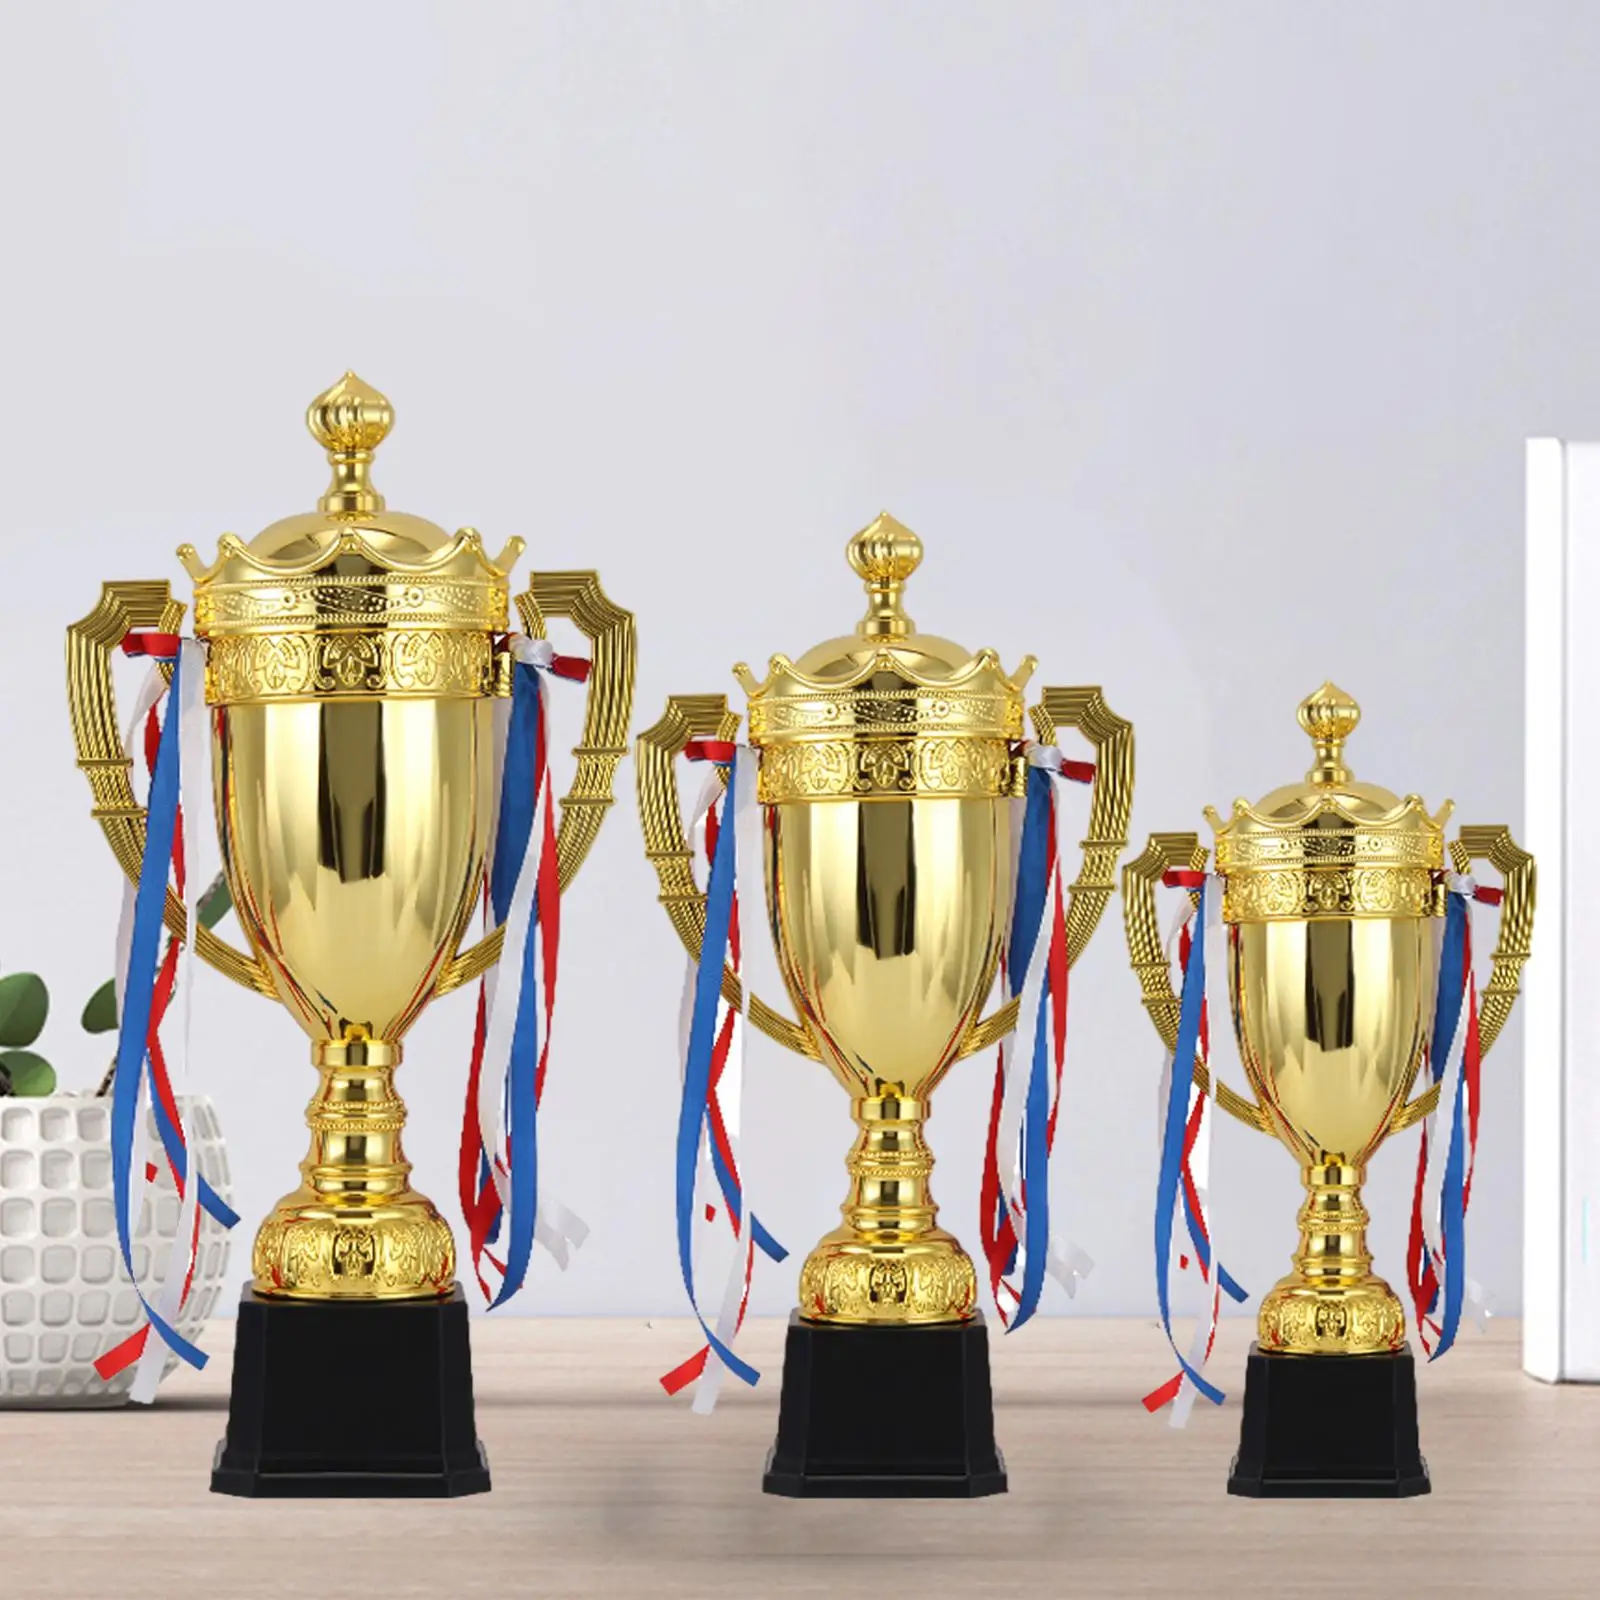 Award Trophy Cup Trophy for Kids for Sports Championships Rewards Football - 3